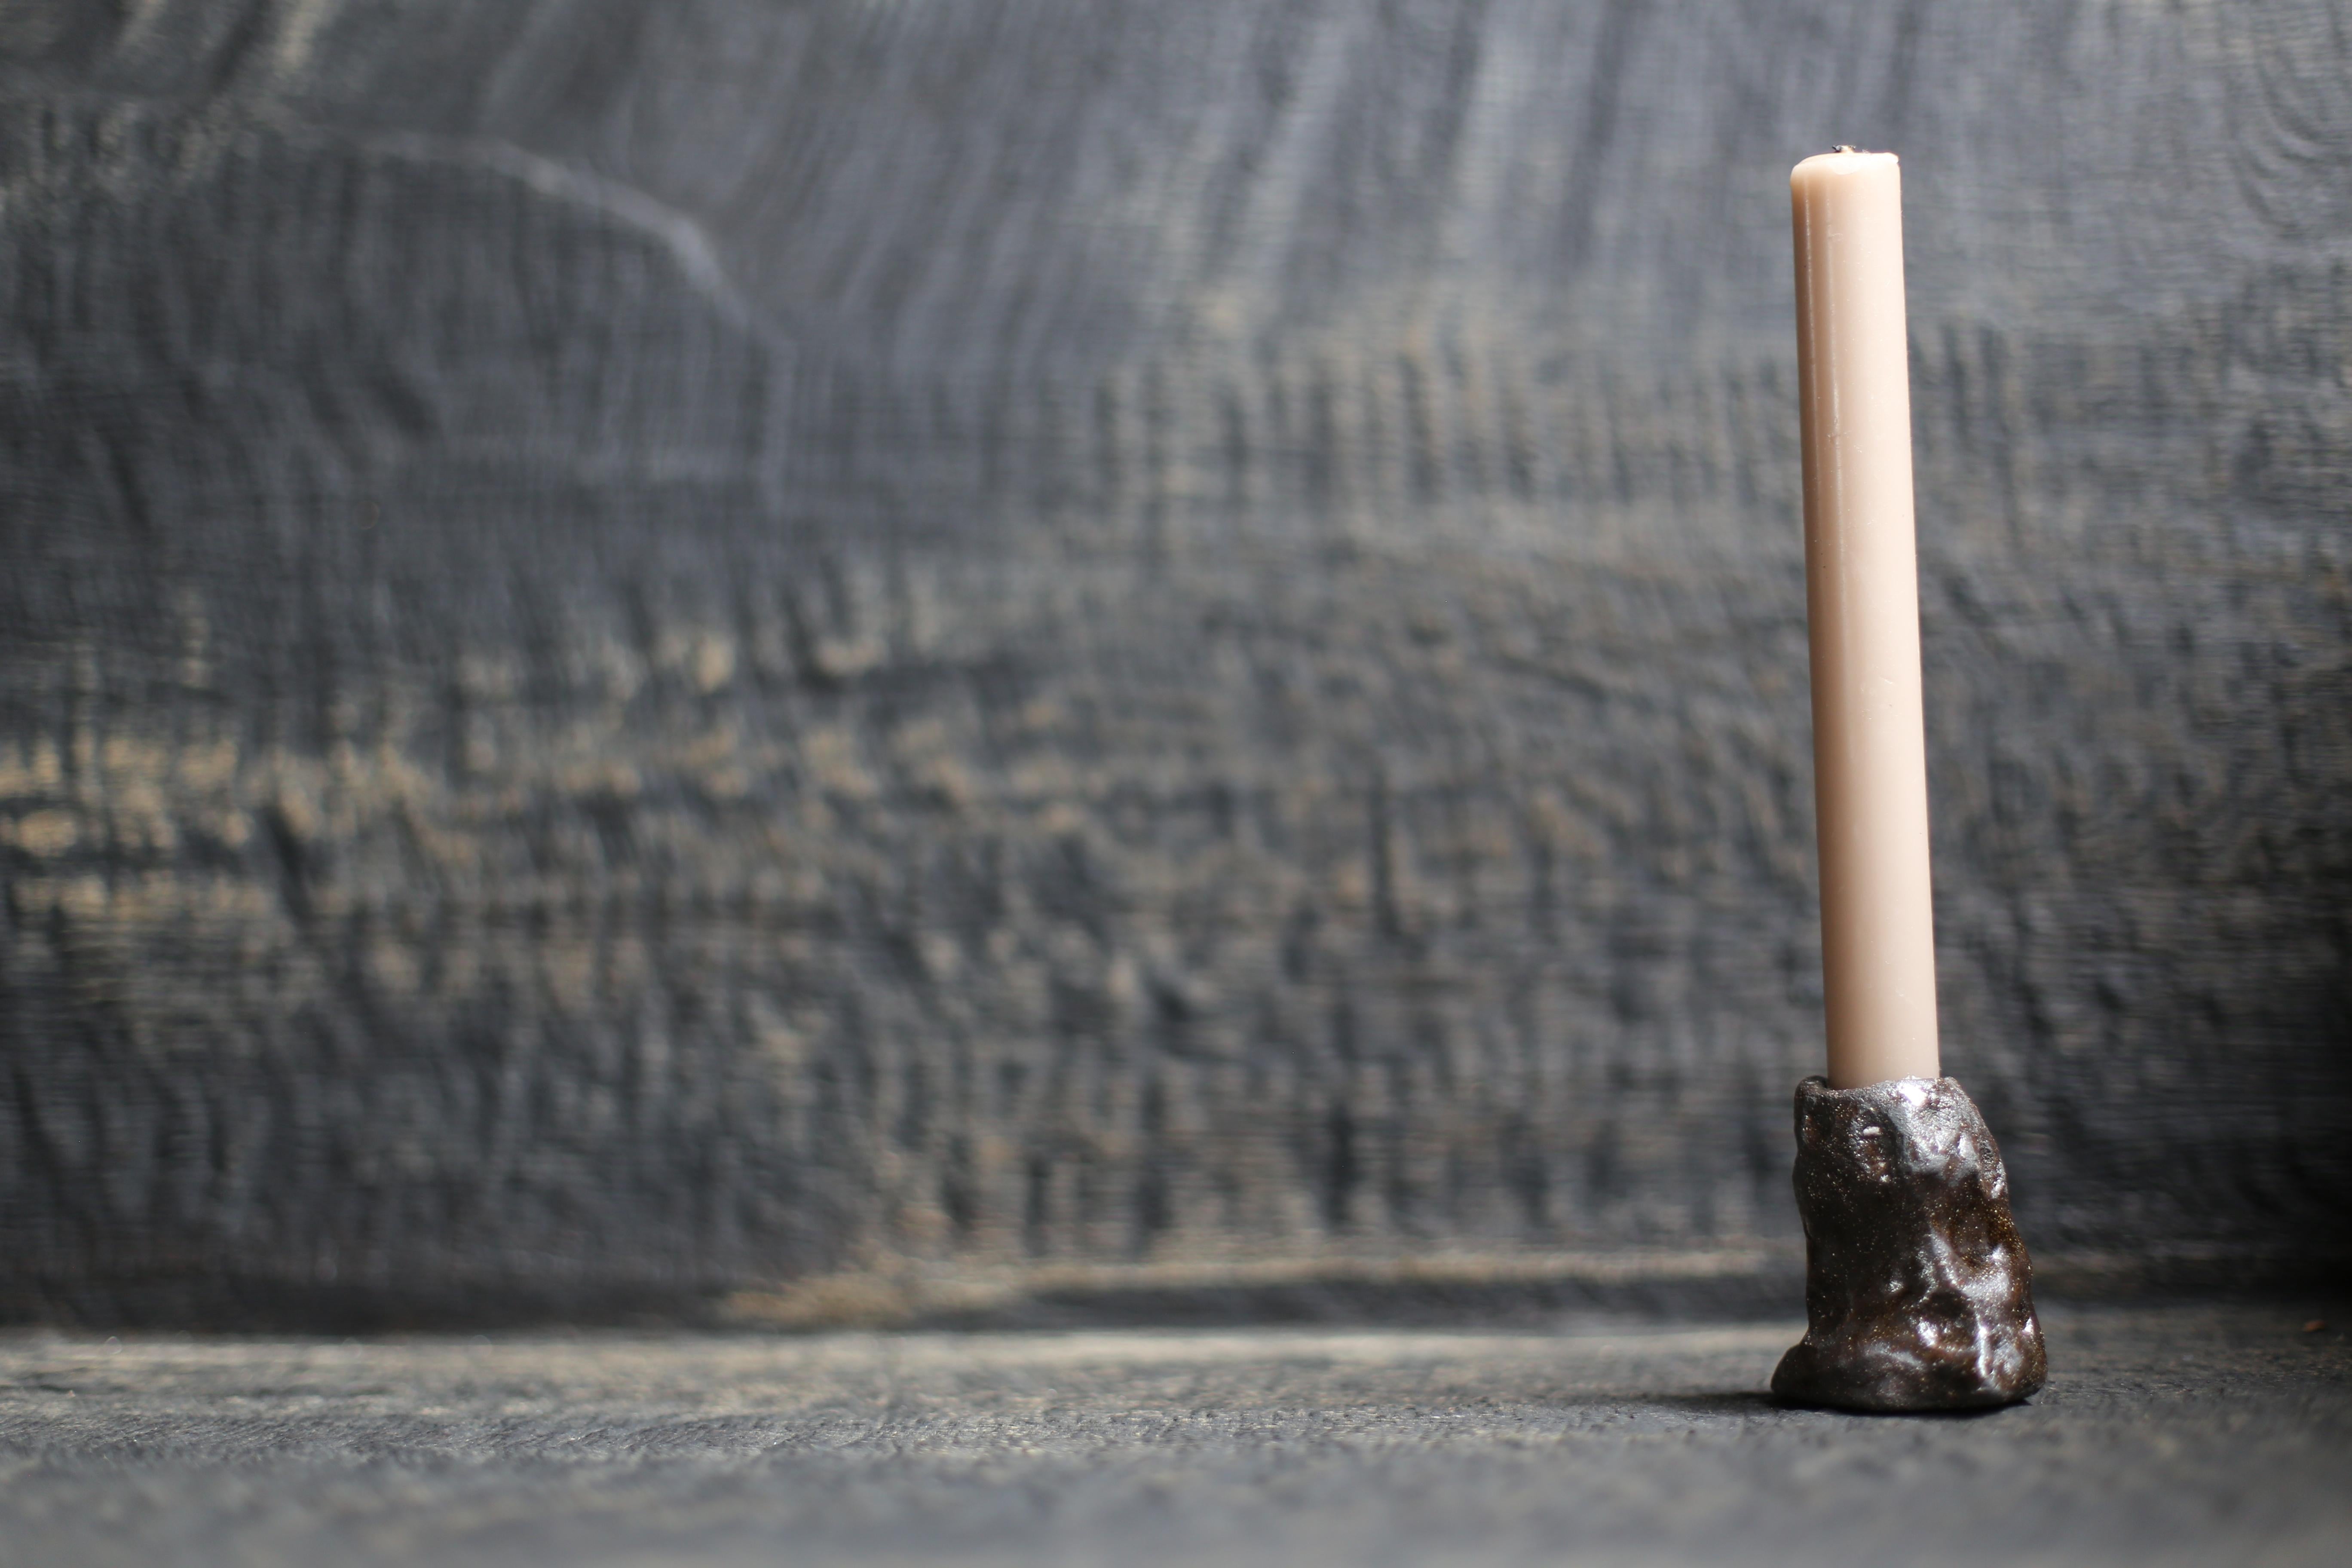 Candle rock in Black Truffle Clay
2022s / Belgium
Size : W 35 D 50 x H 65 mm
Artist : Sigrid Volders


[Sigrid Volders]
Based in Antwerp, Belgium, she works vigorously as a ceramic artist, mainly as a hair-making artist active in media such